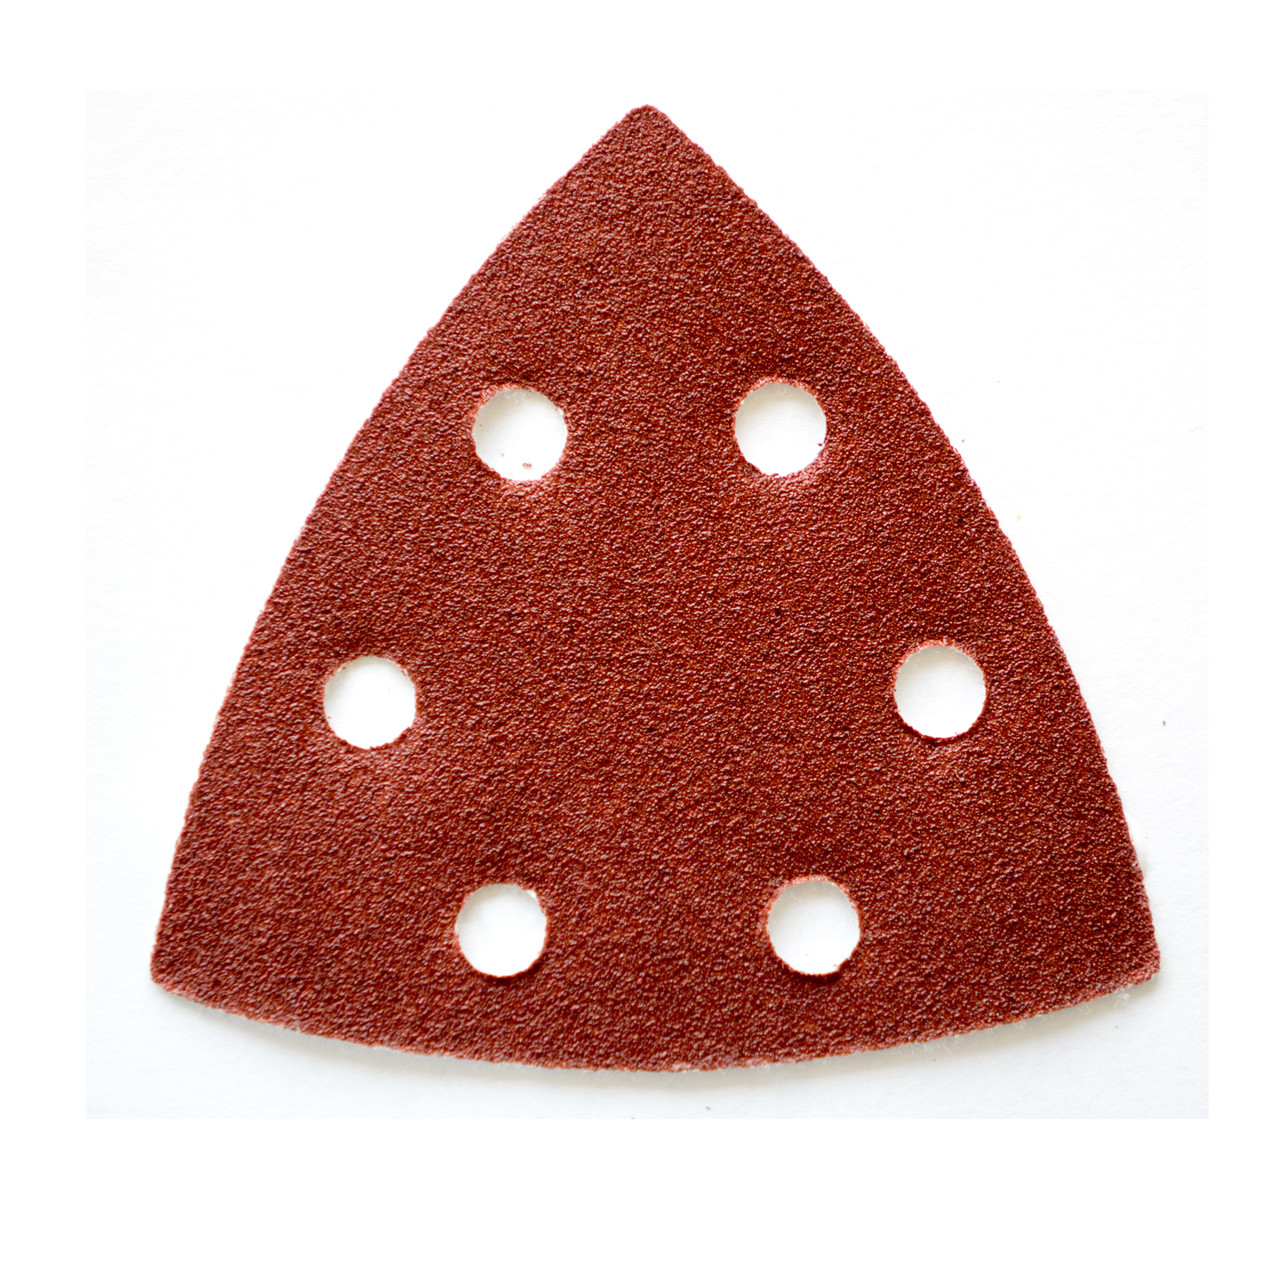 Red Detail Sandpaper Assortment 3-3/4DIA. 6 Holes, 6 Grits, 36 Pack